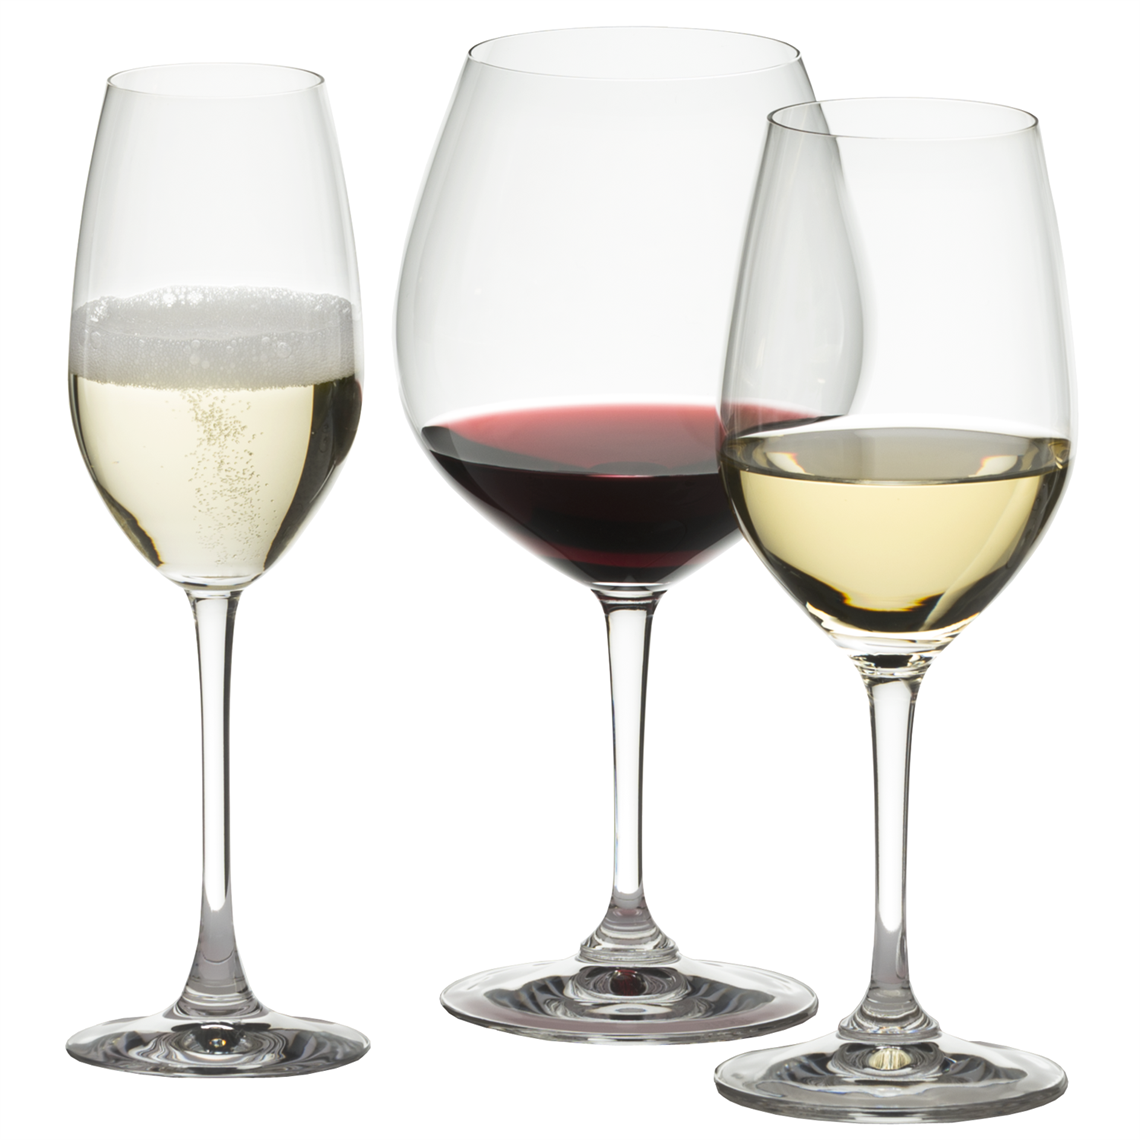 View more riedel extreme from our Restaurant & Trade Glasses range